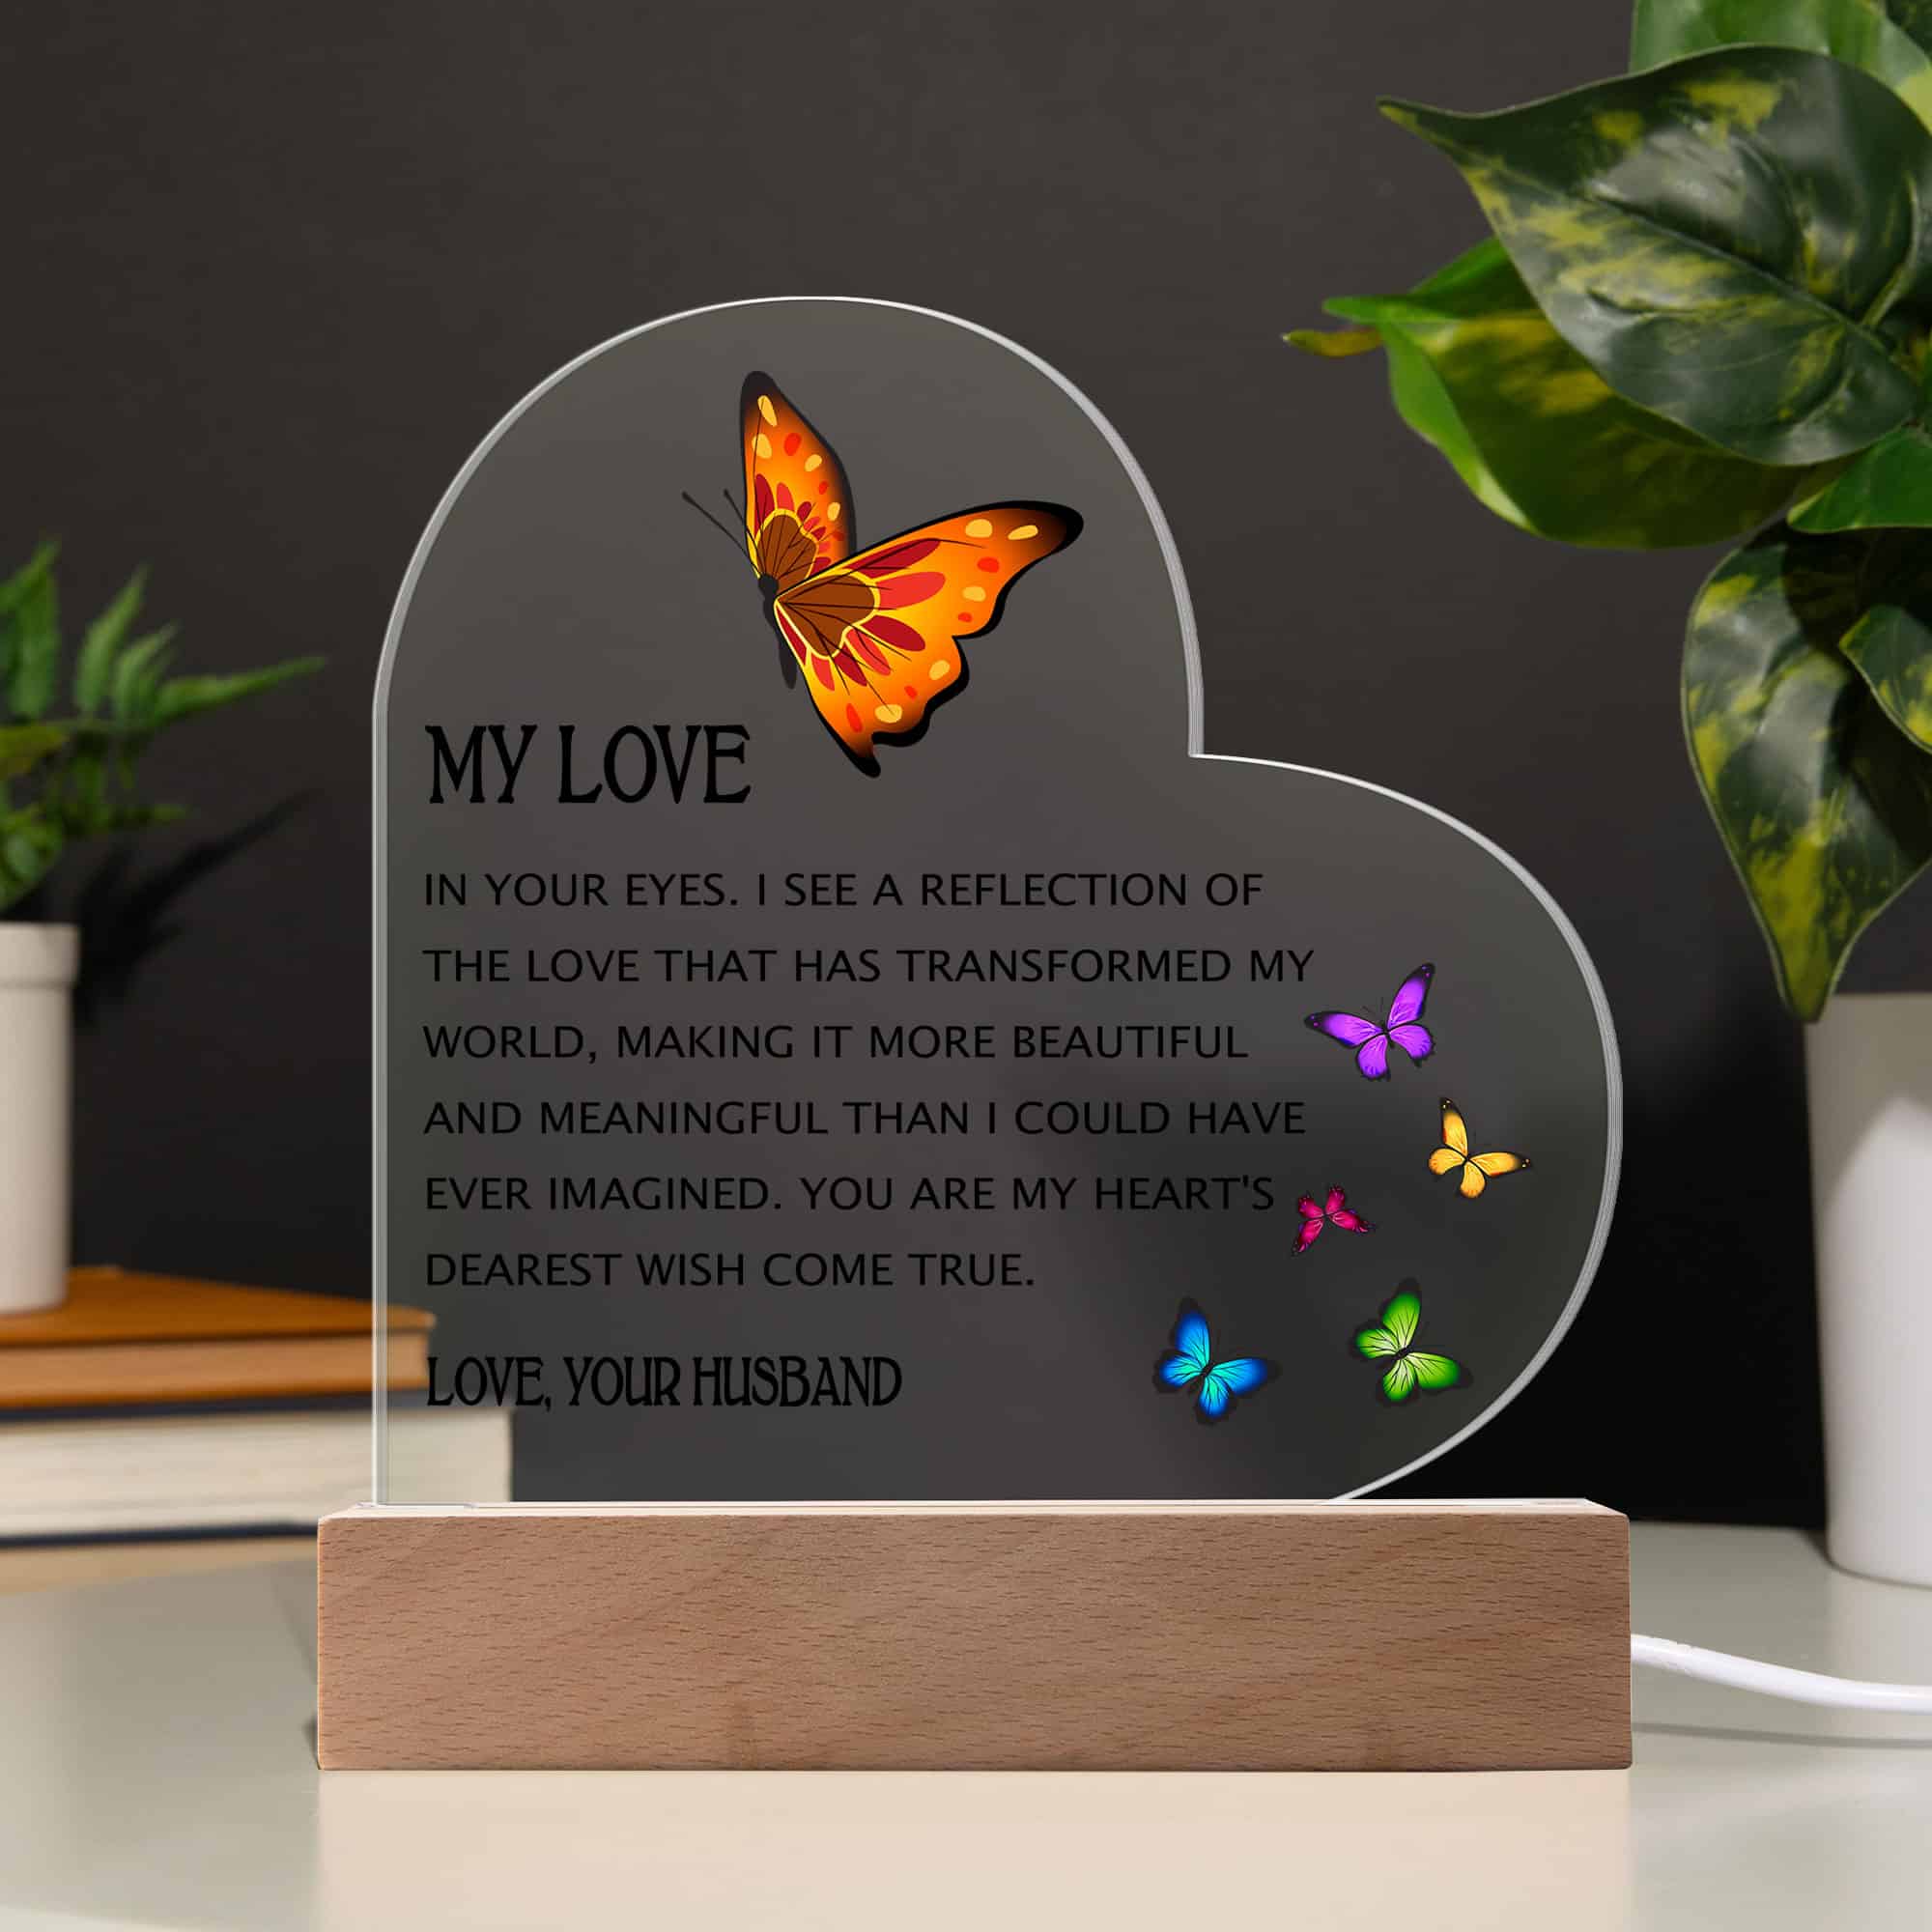 Acrylic Heart Plaque Heartfelt Message From Husband Gift For My Love - FavoJewelry